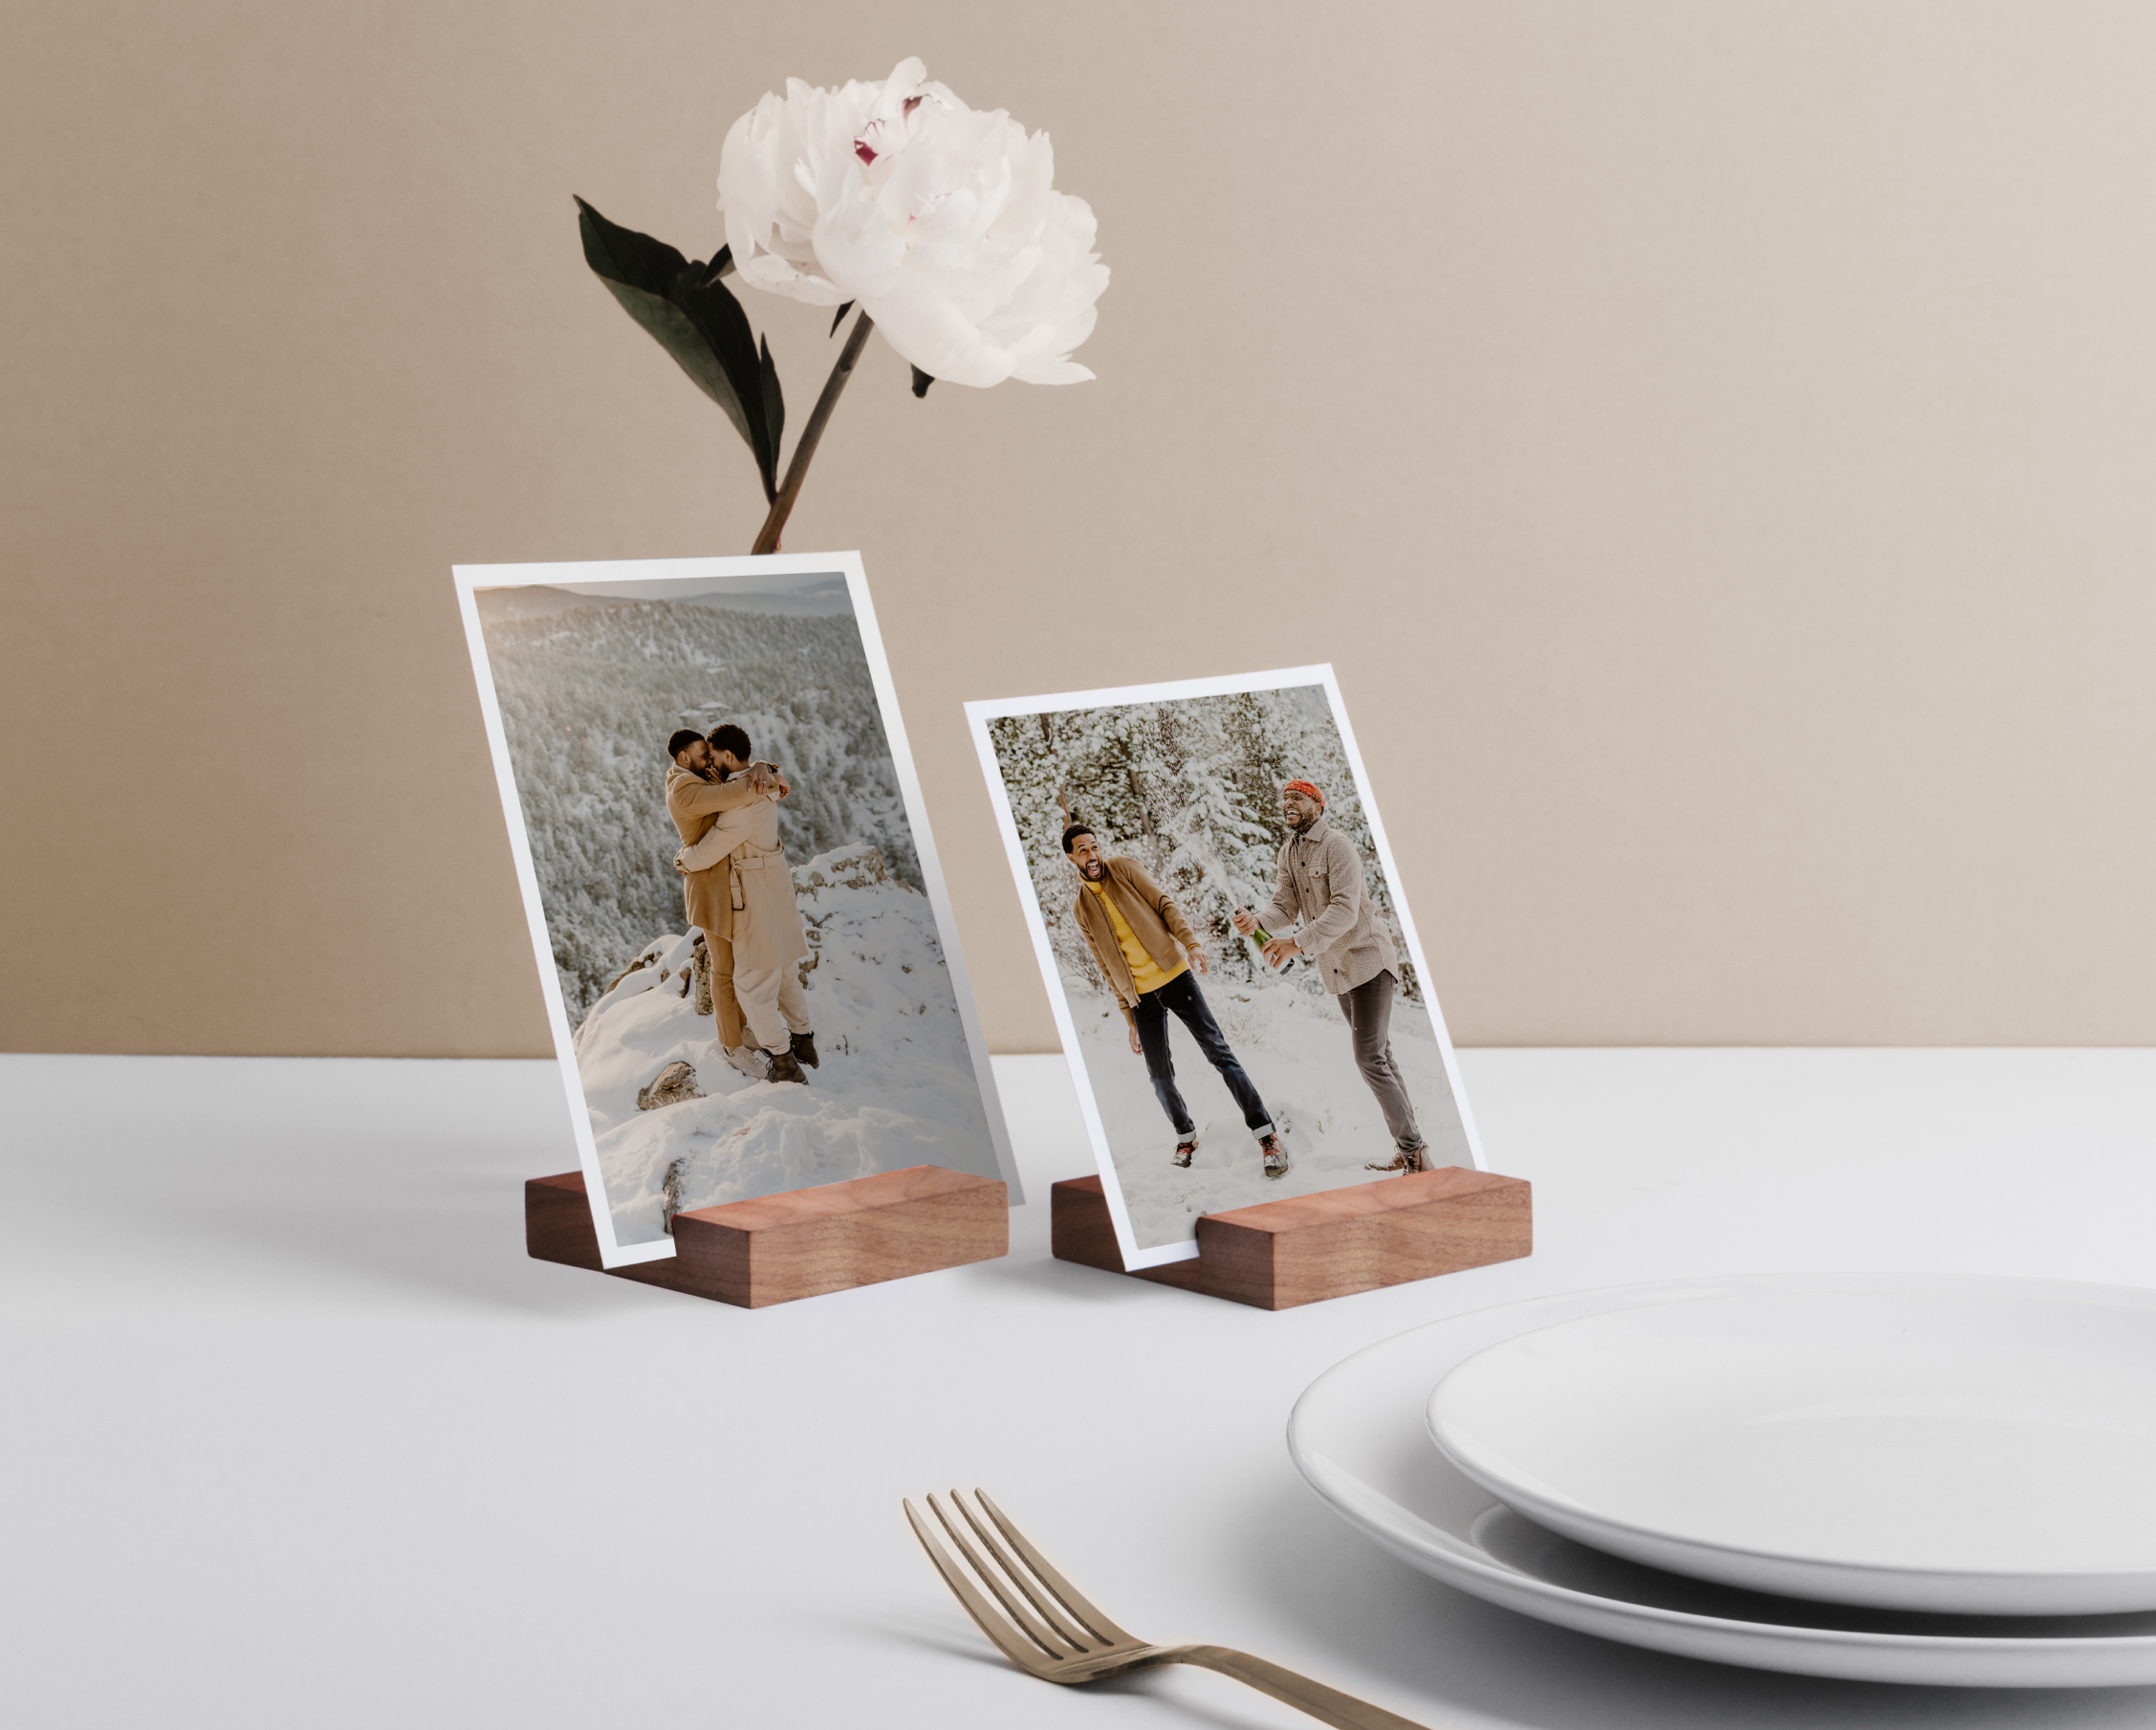 Artifact Uprising Everyday Prints featuring engagement photos of two young men displayed on Walnut Print Blocks beside a wedding place setting